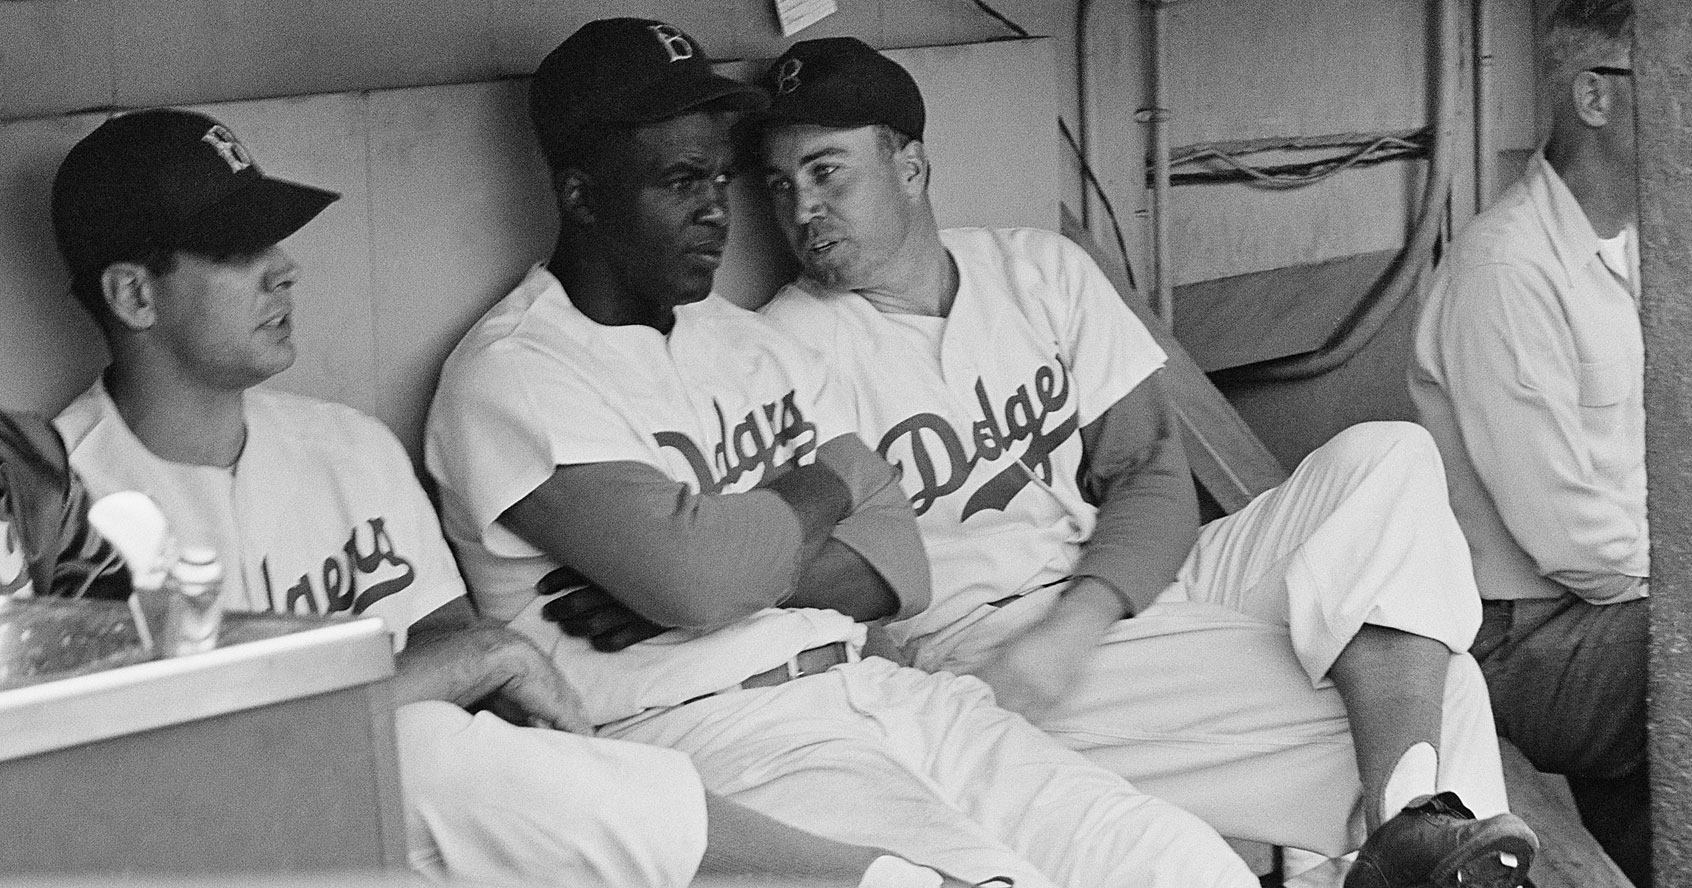 Jackie Robinson and Duke Snider, 1953 Photograph by Kenneth Edie Museum of the City of New York, The LOOK Collection. Gift of Cowles Magazines, Inc.